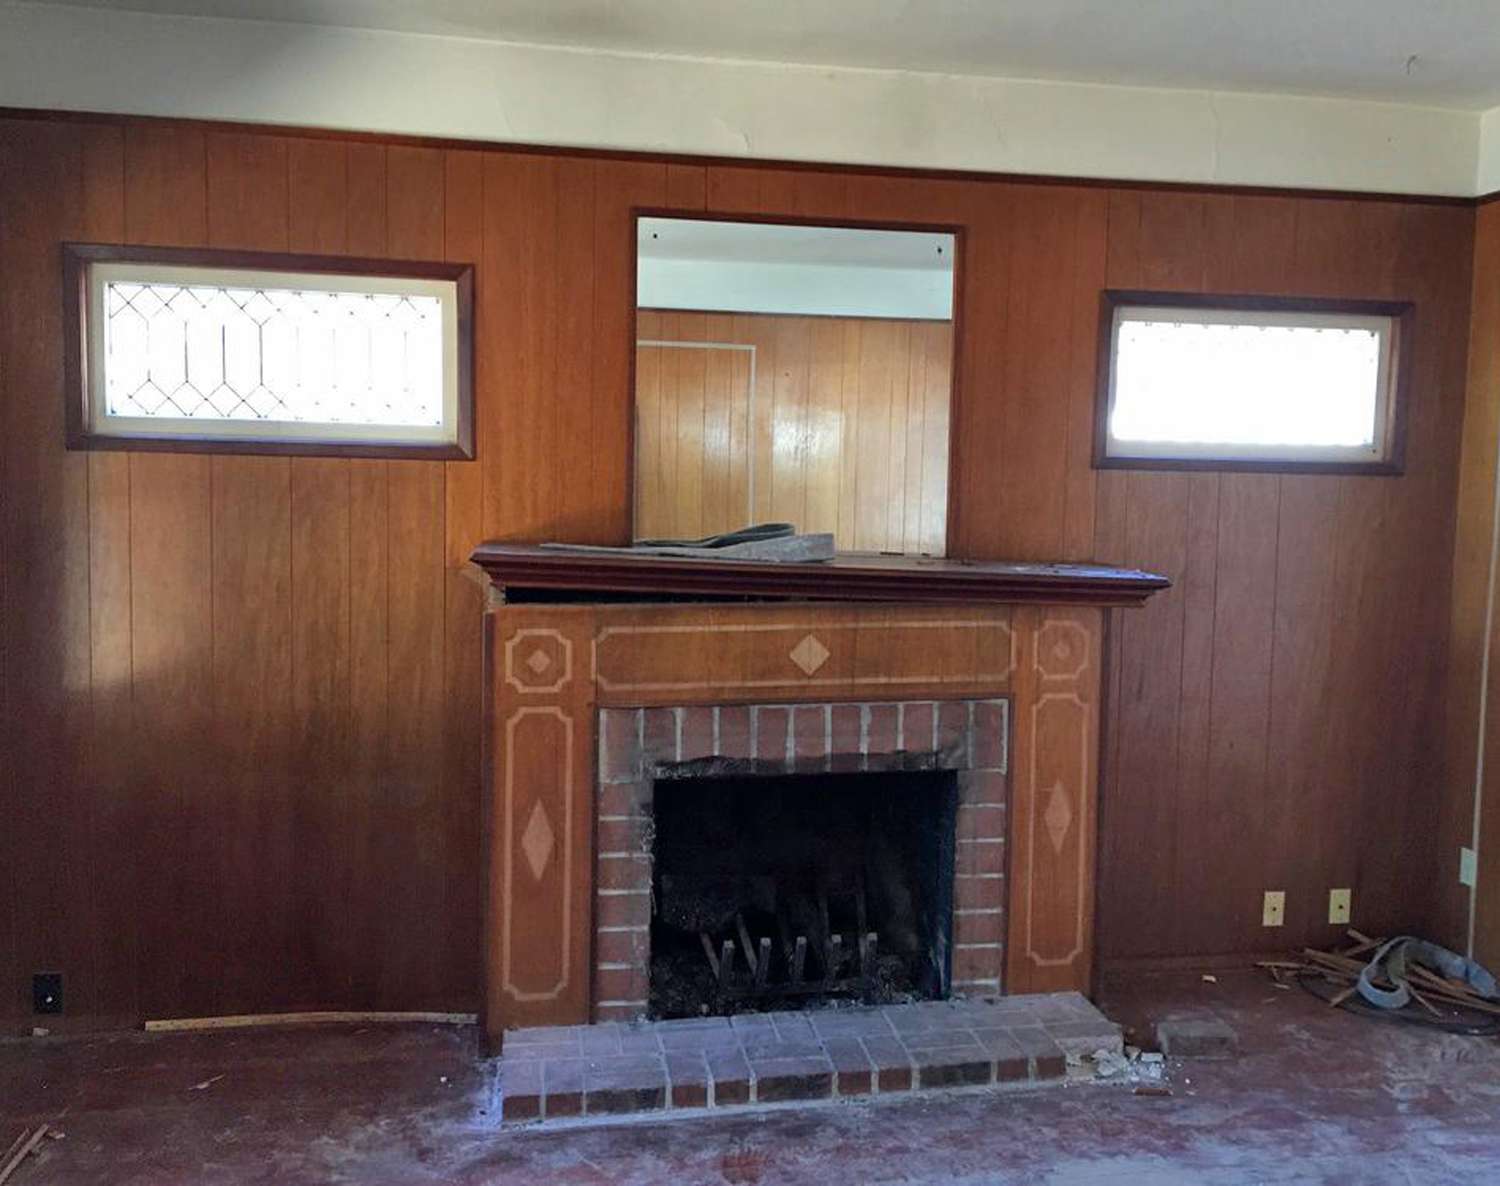 These Before And After Fireplace Makeovers Went From Cold To Cozy Better Homes Gardens